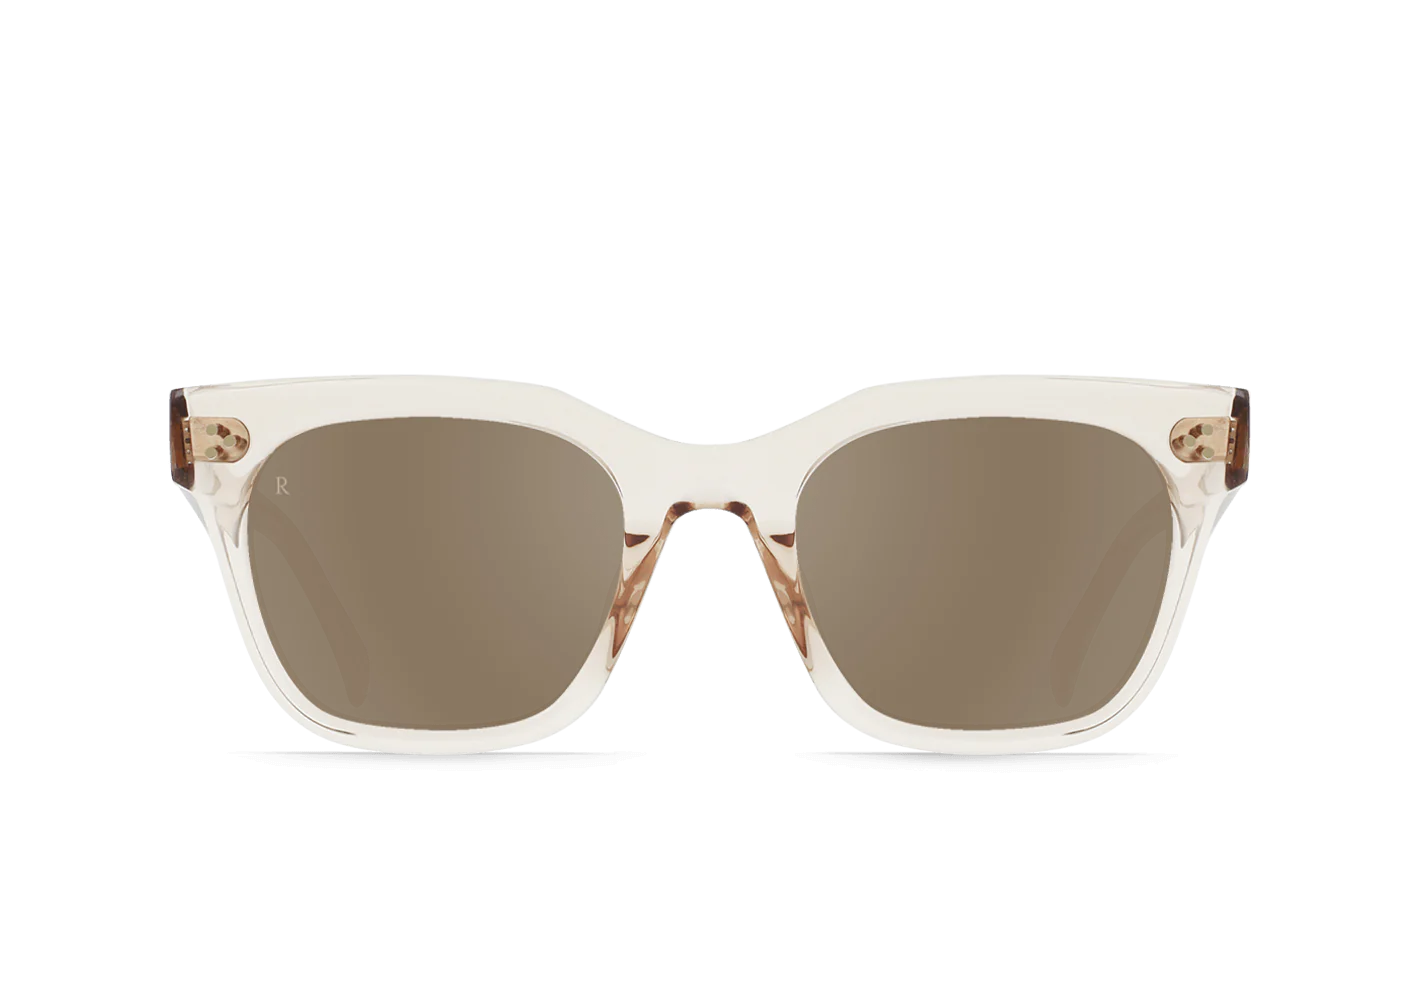 RAEN's Huxton Unisex Square Sunglasses with Dawn frame and Mink Gradient Mirror lenses